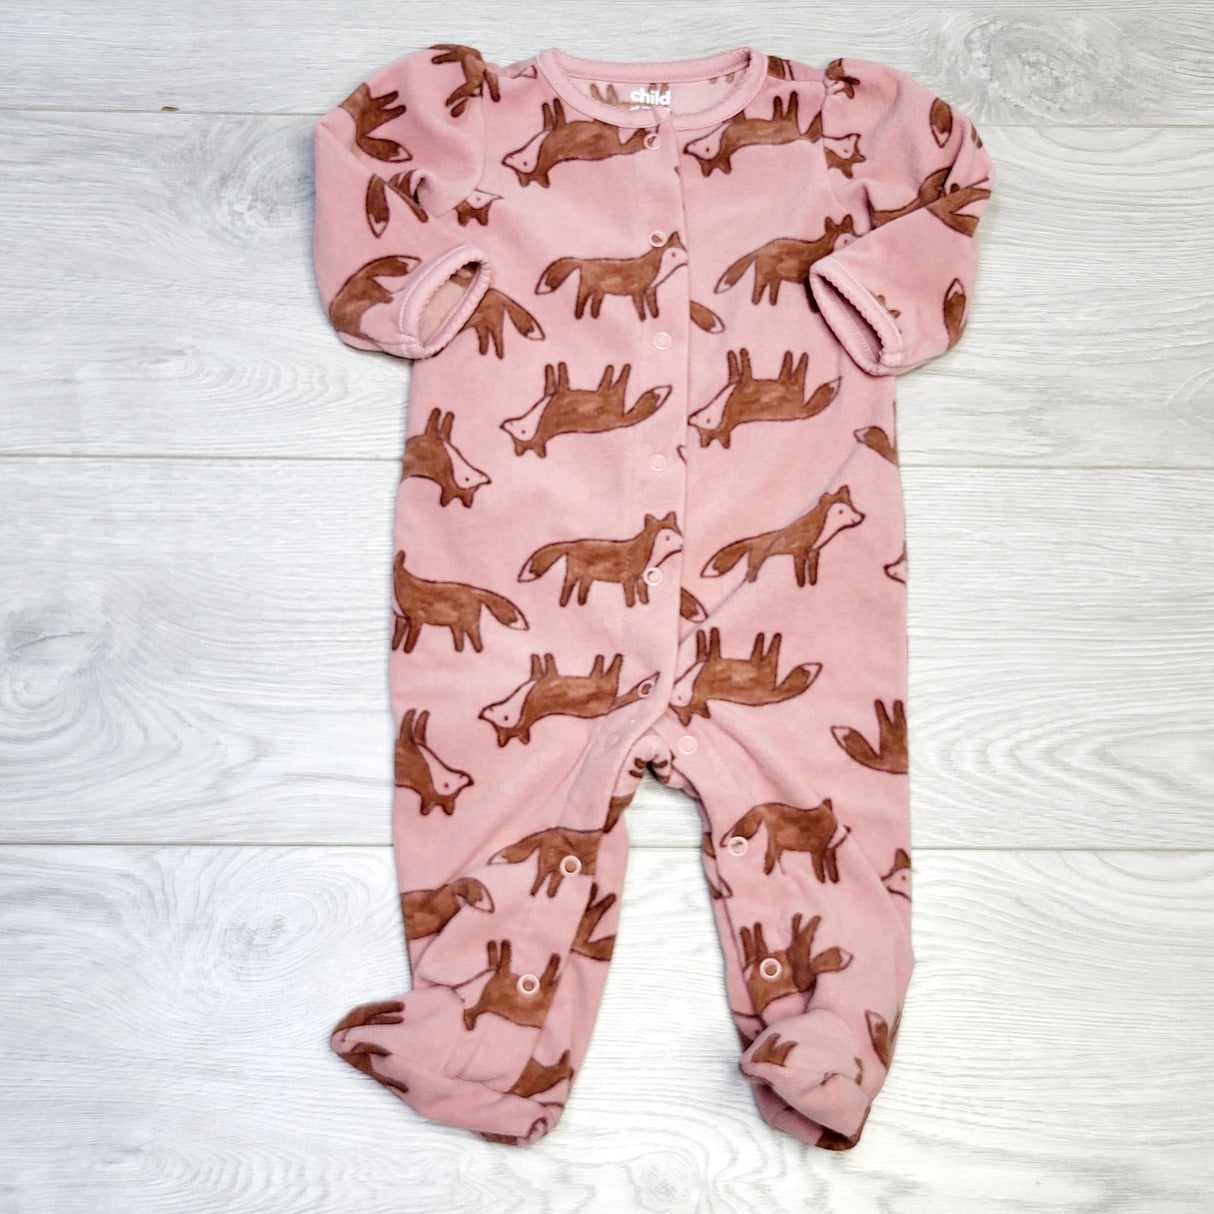 COWN1 - Child of Mine pink fleece sleeper with foxes. Size 3-6 months